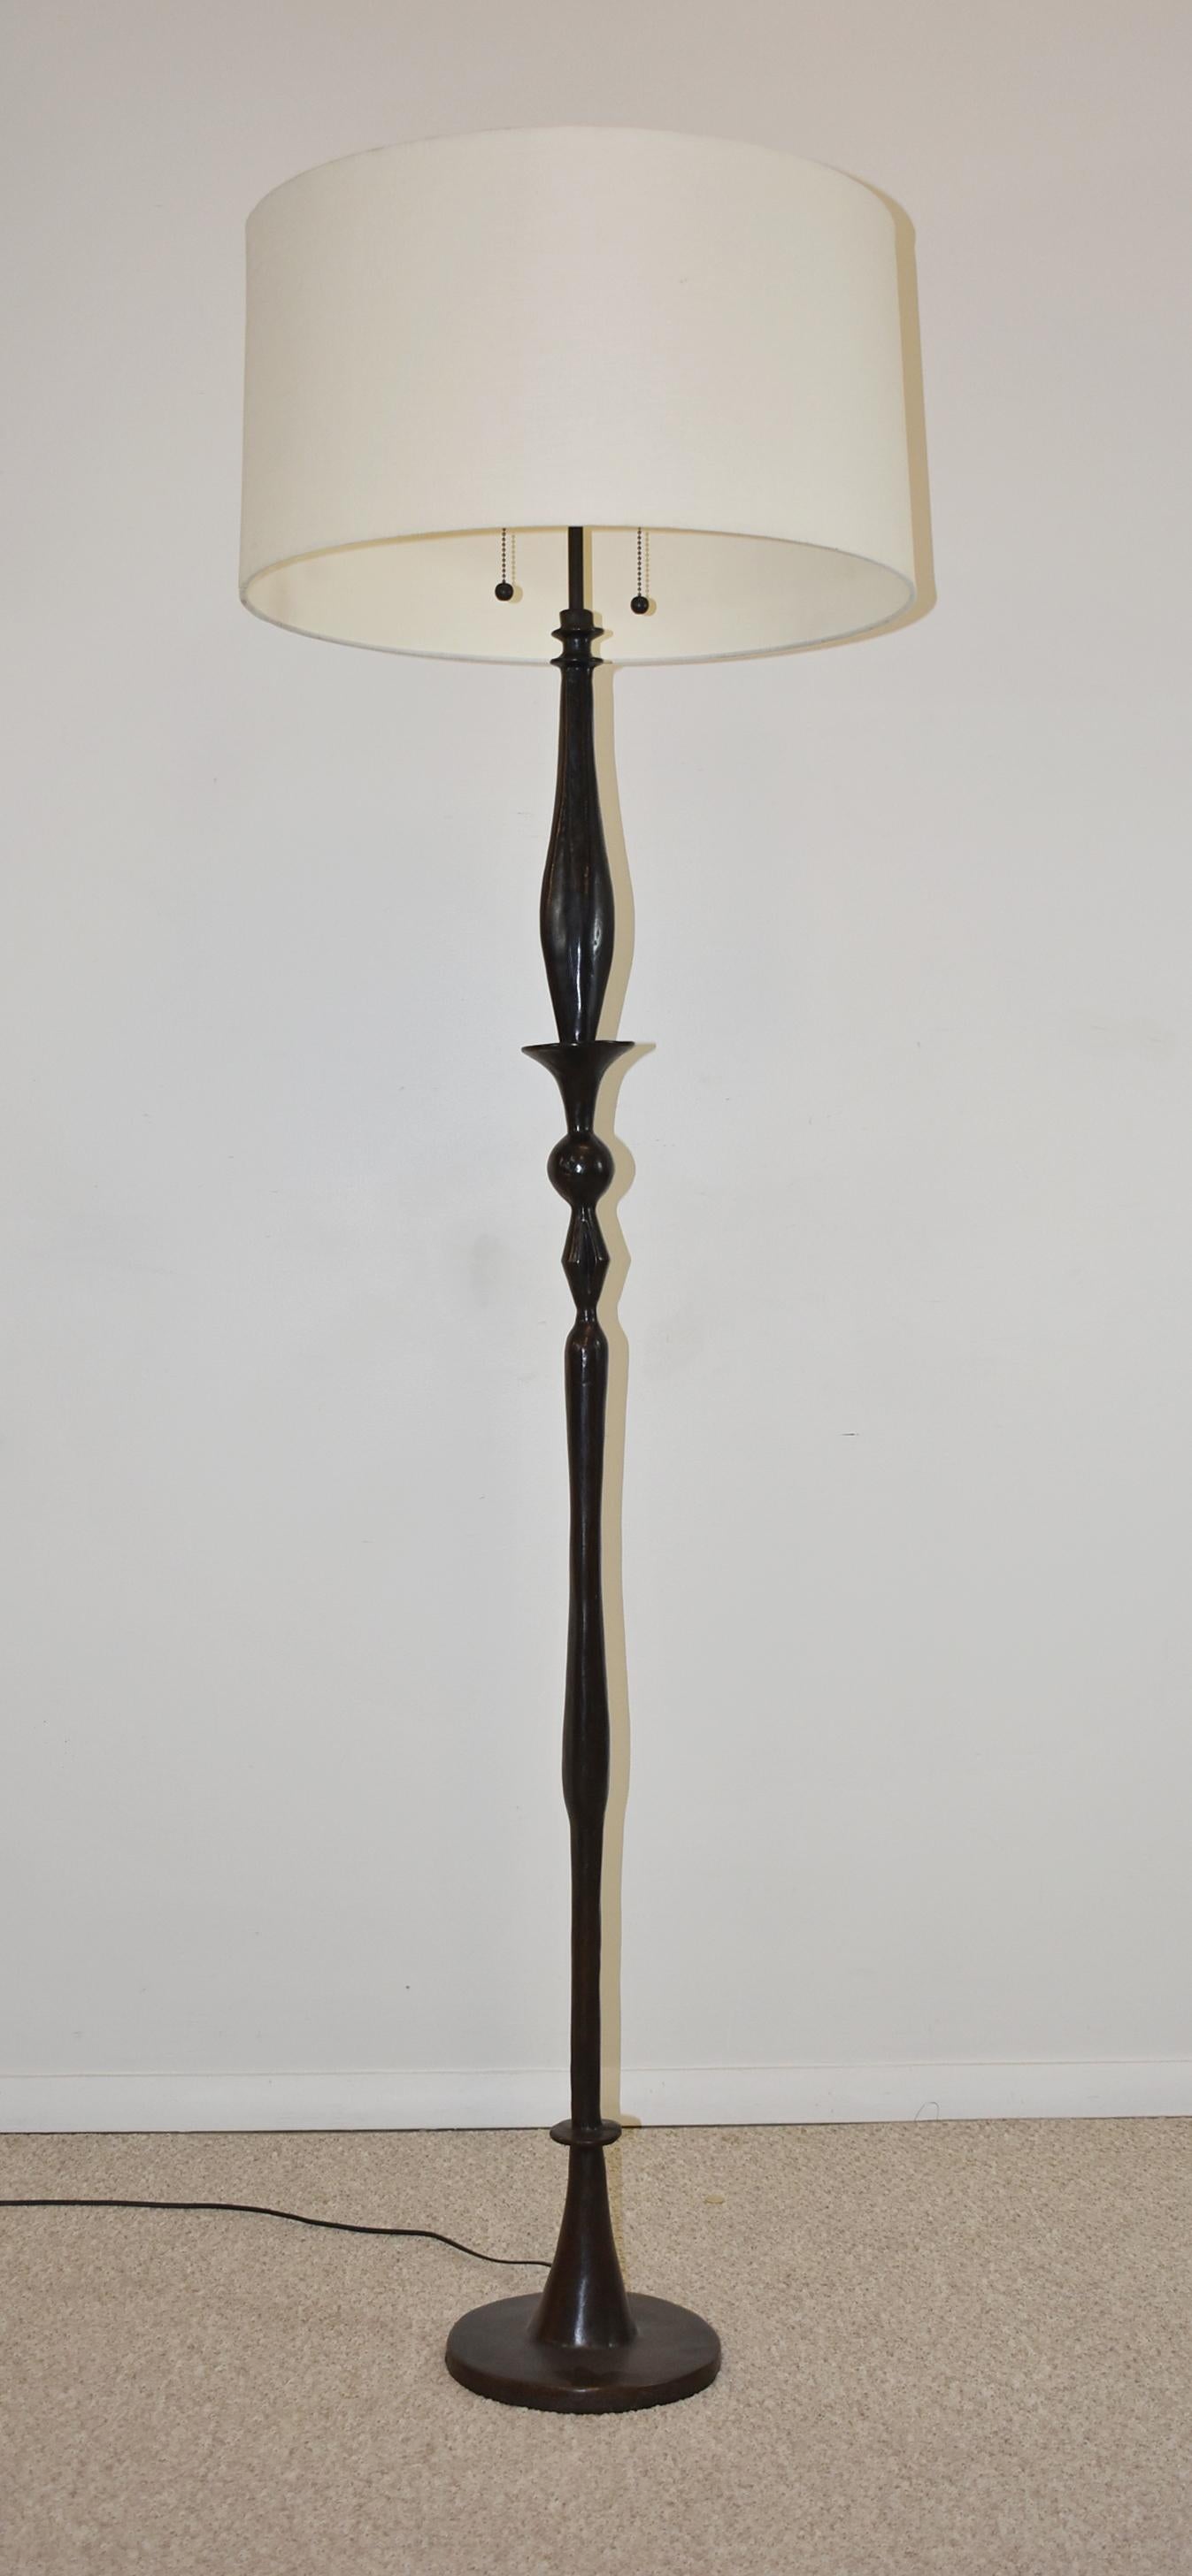 Modern bronze floor lamp in the style of Giacometti. Circa 1980s. This modern designed floor lamp has a beautiful dark patina, two sockets with ball pulls and an adjustable height tube between 71 1/2